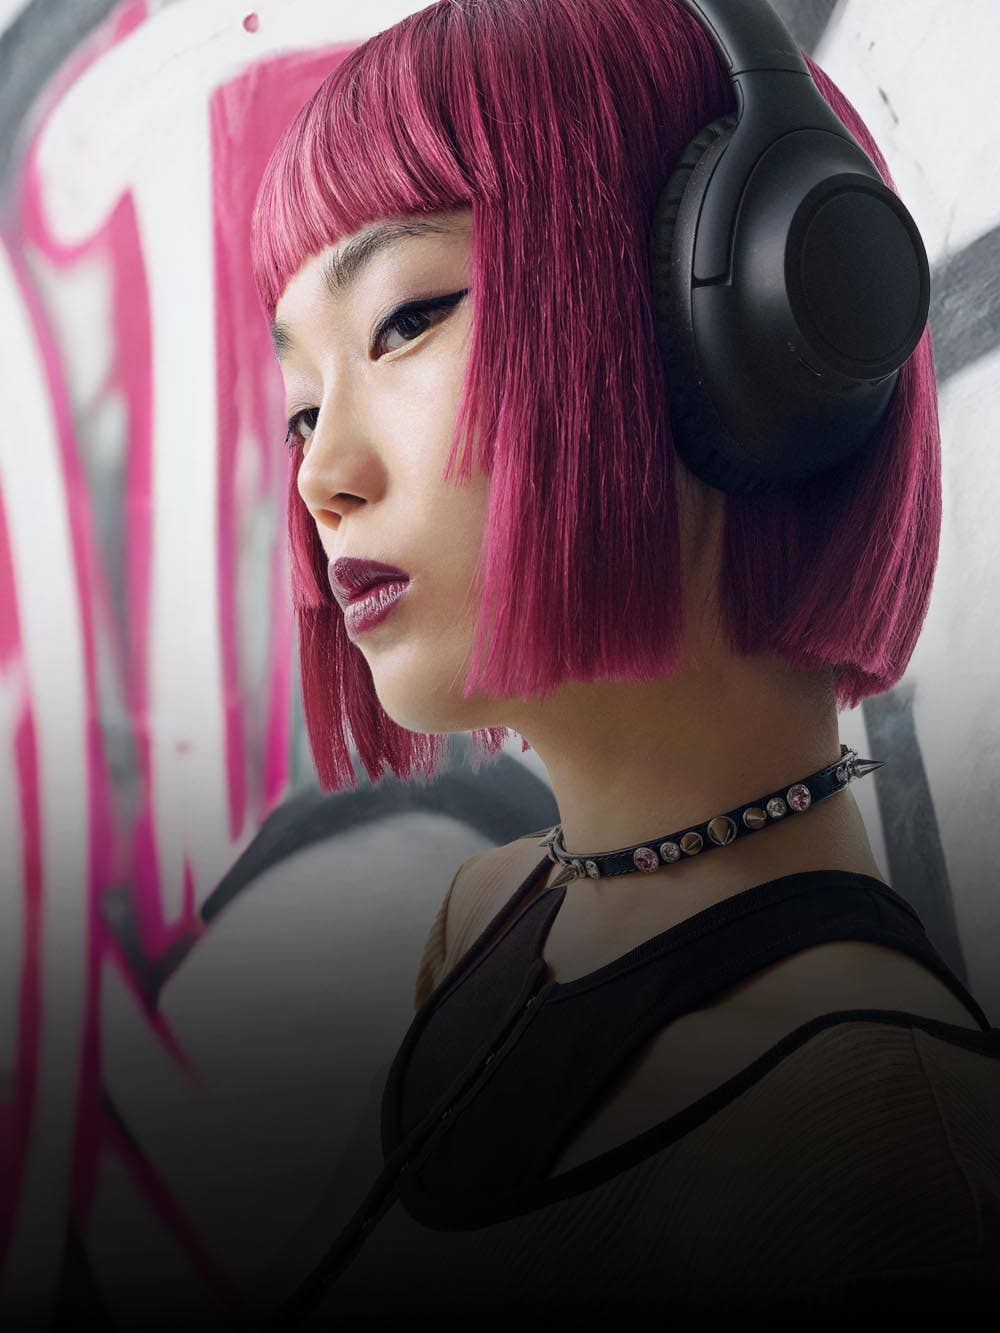 Audio-Technica announces longest-lasting wireless headphones to date with incredible 90-hour battery life